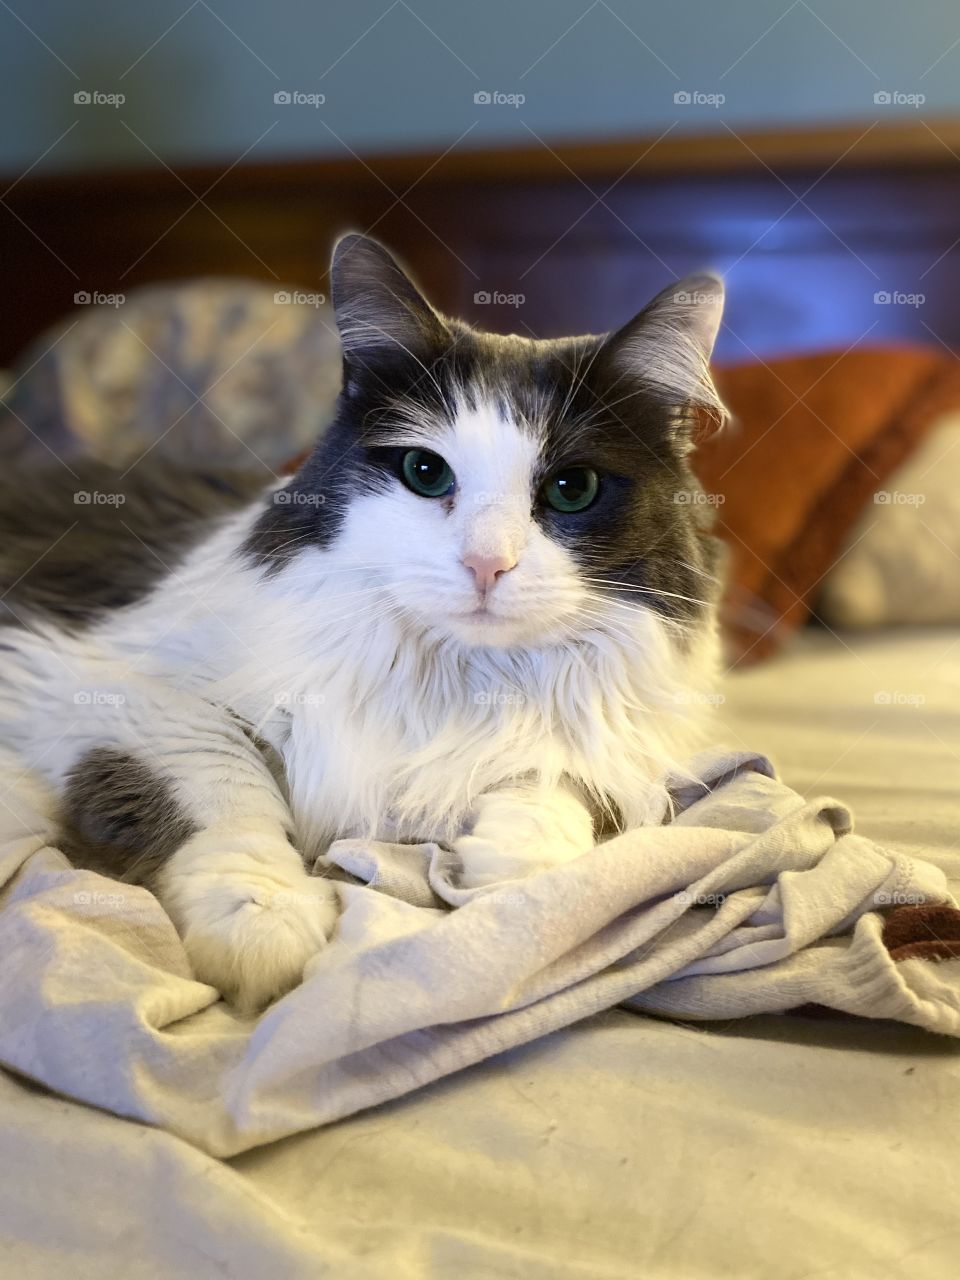 Sweet gray and white kitty waiting eagerly for her goodnight snuggles and pets 